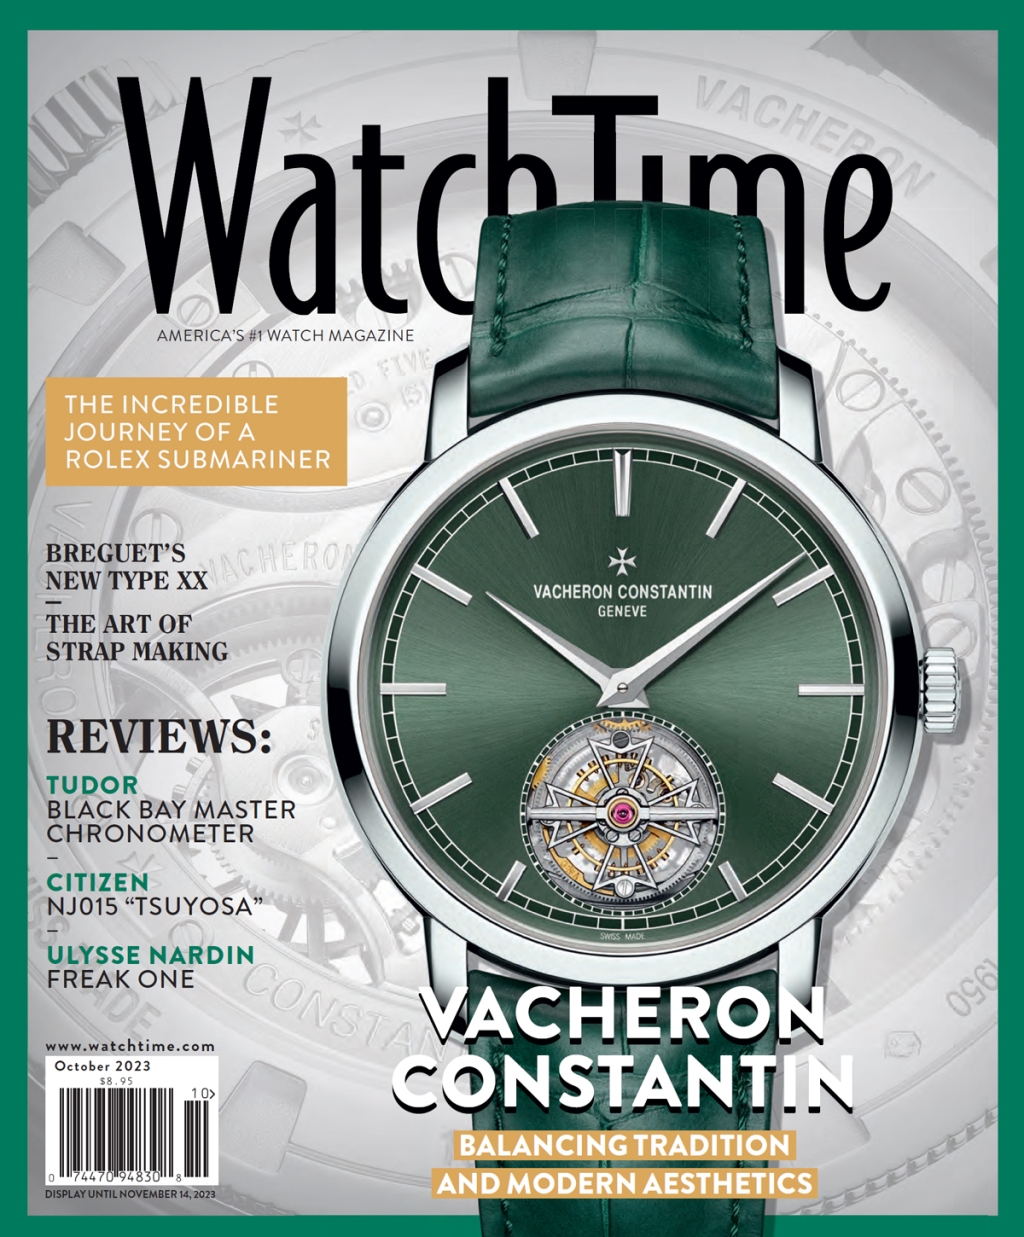 WatchTime’s October Issue 2023